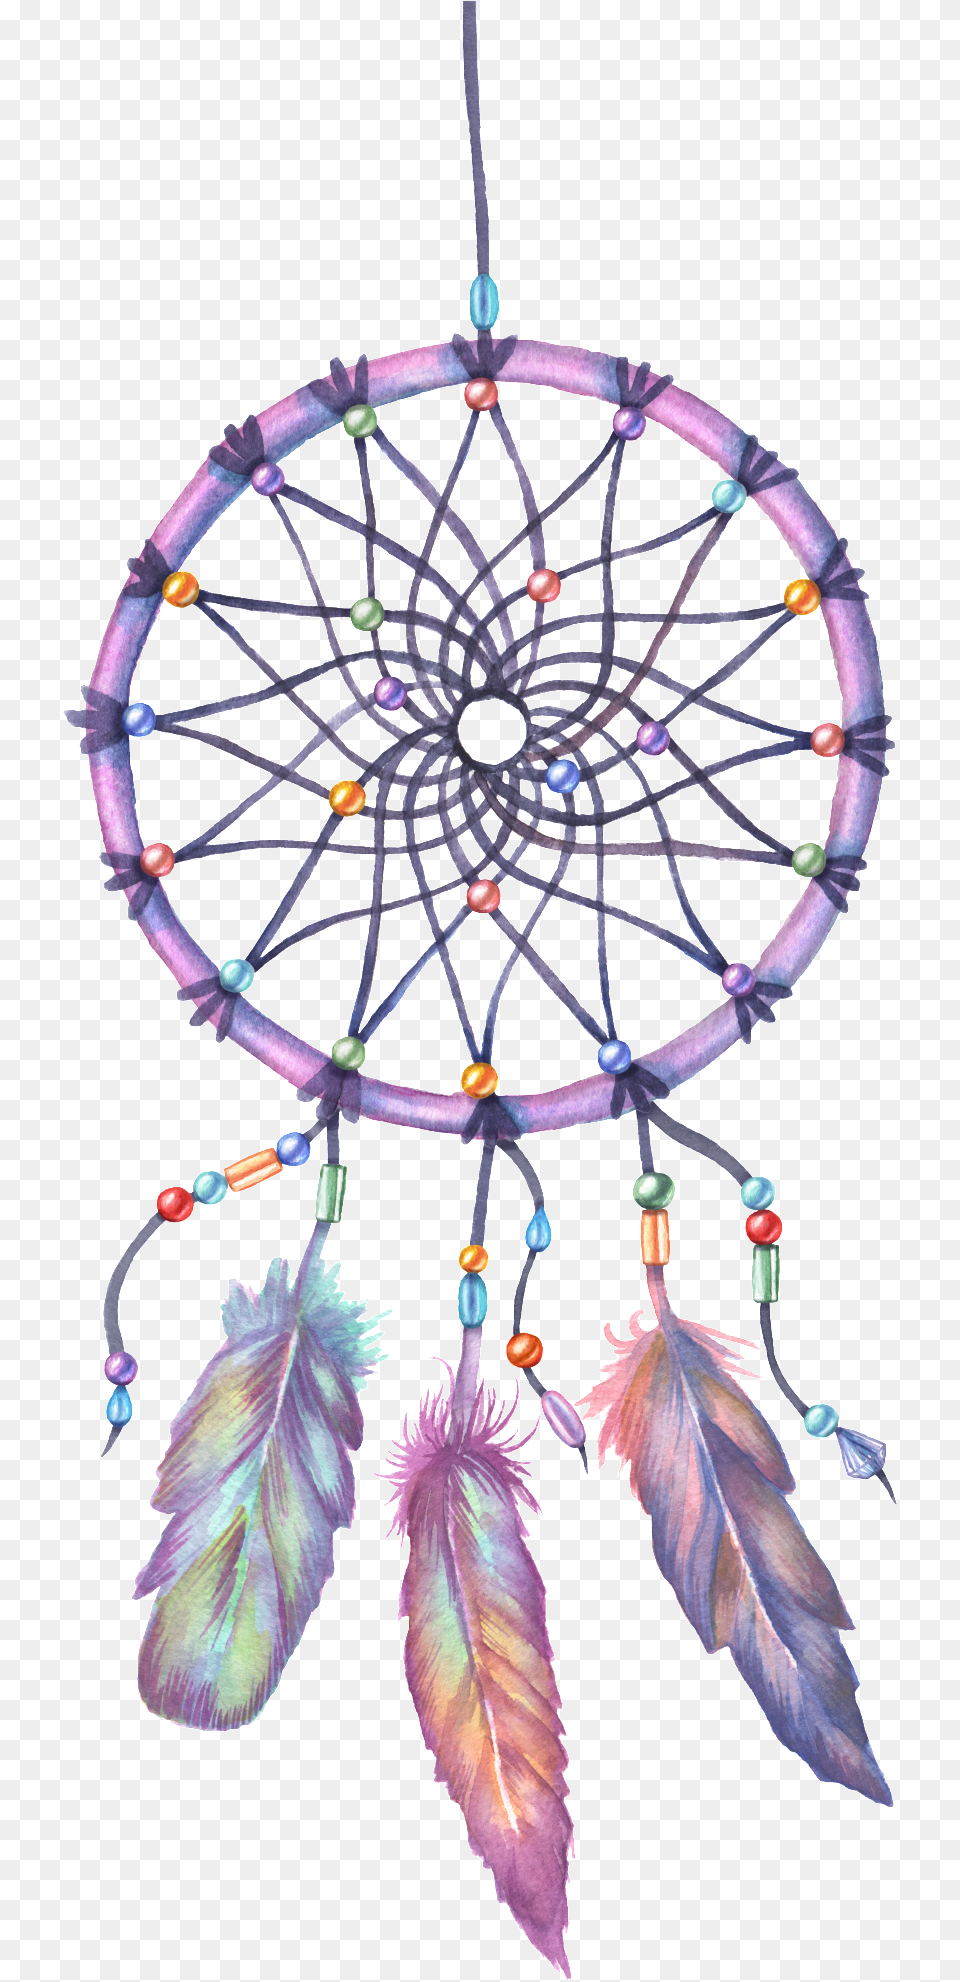 Bloody Feather Decorative Dream Catcher Tattoo Design, Chandelier, Lamp, Hoop, Accessories Png